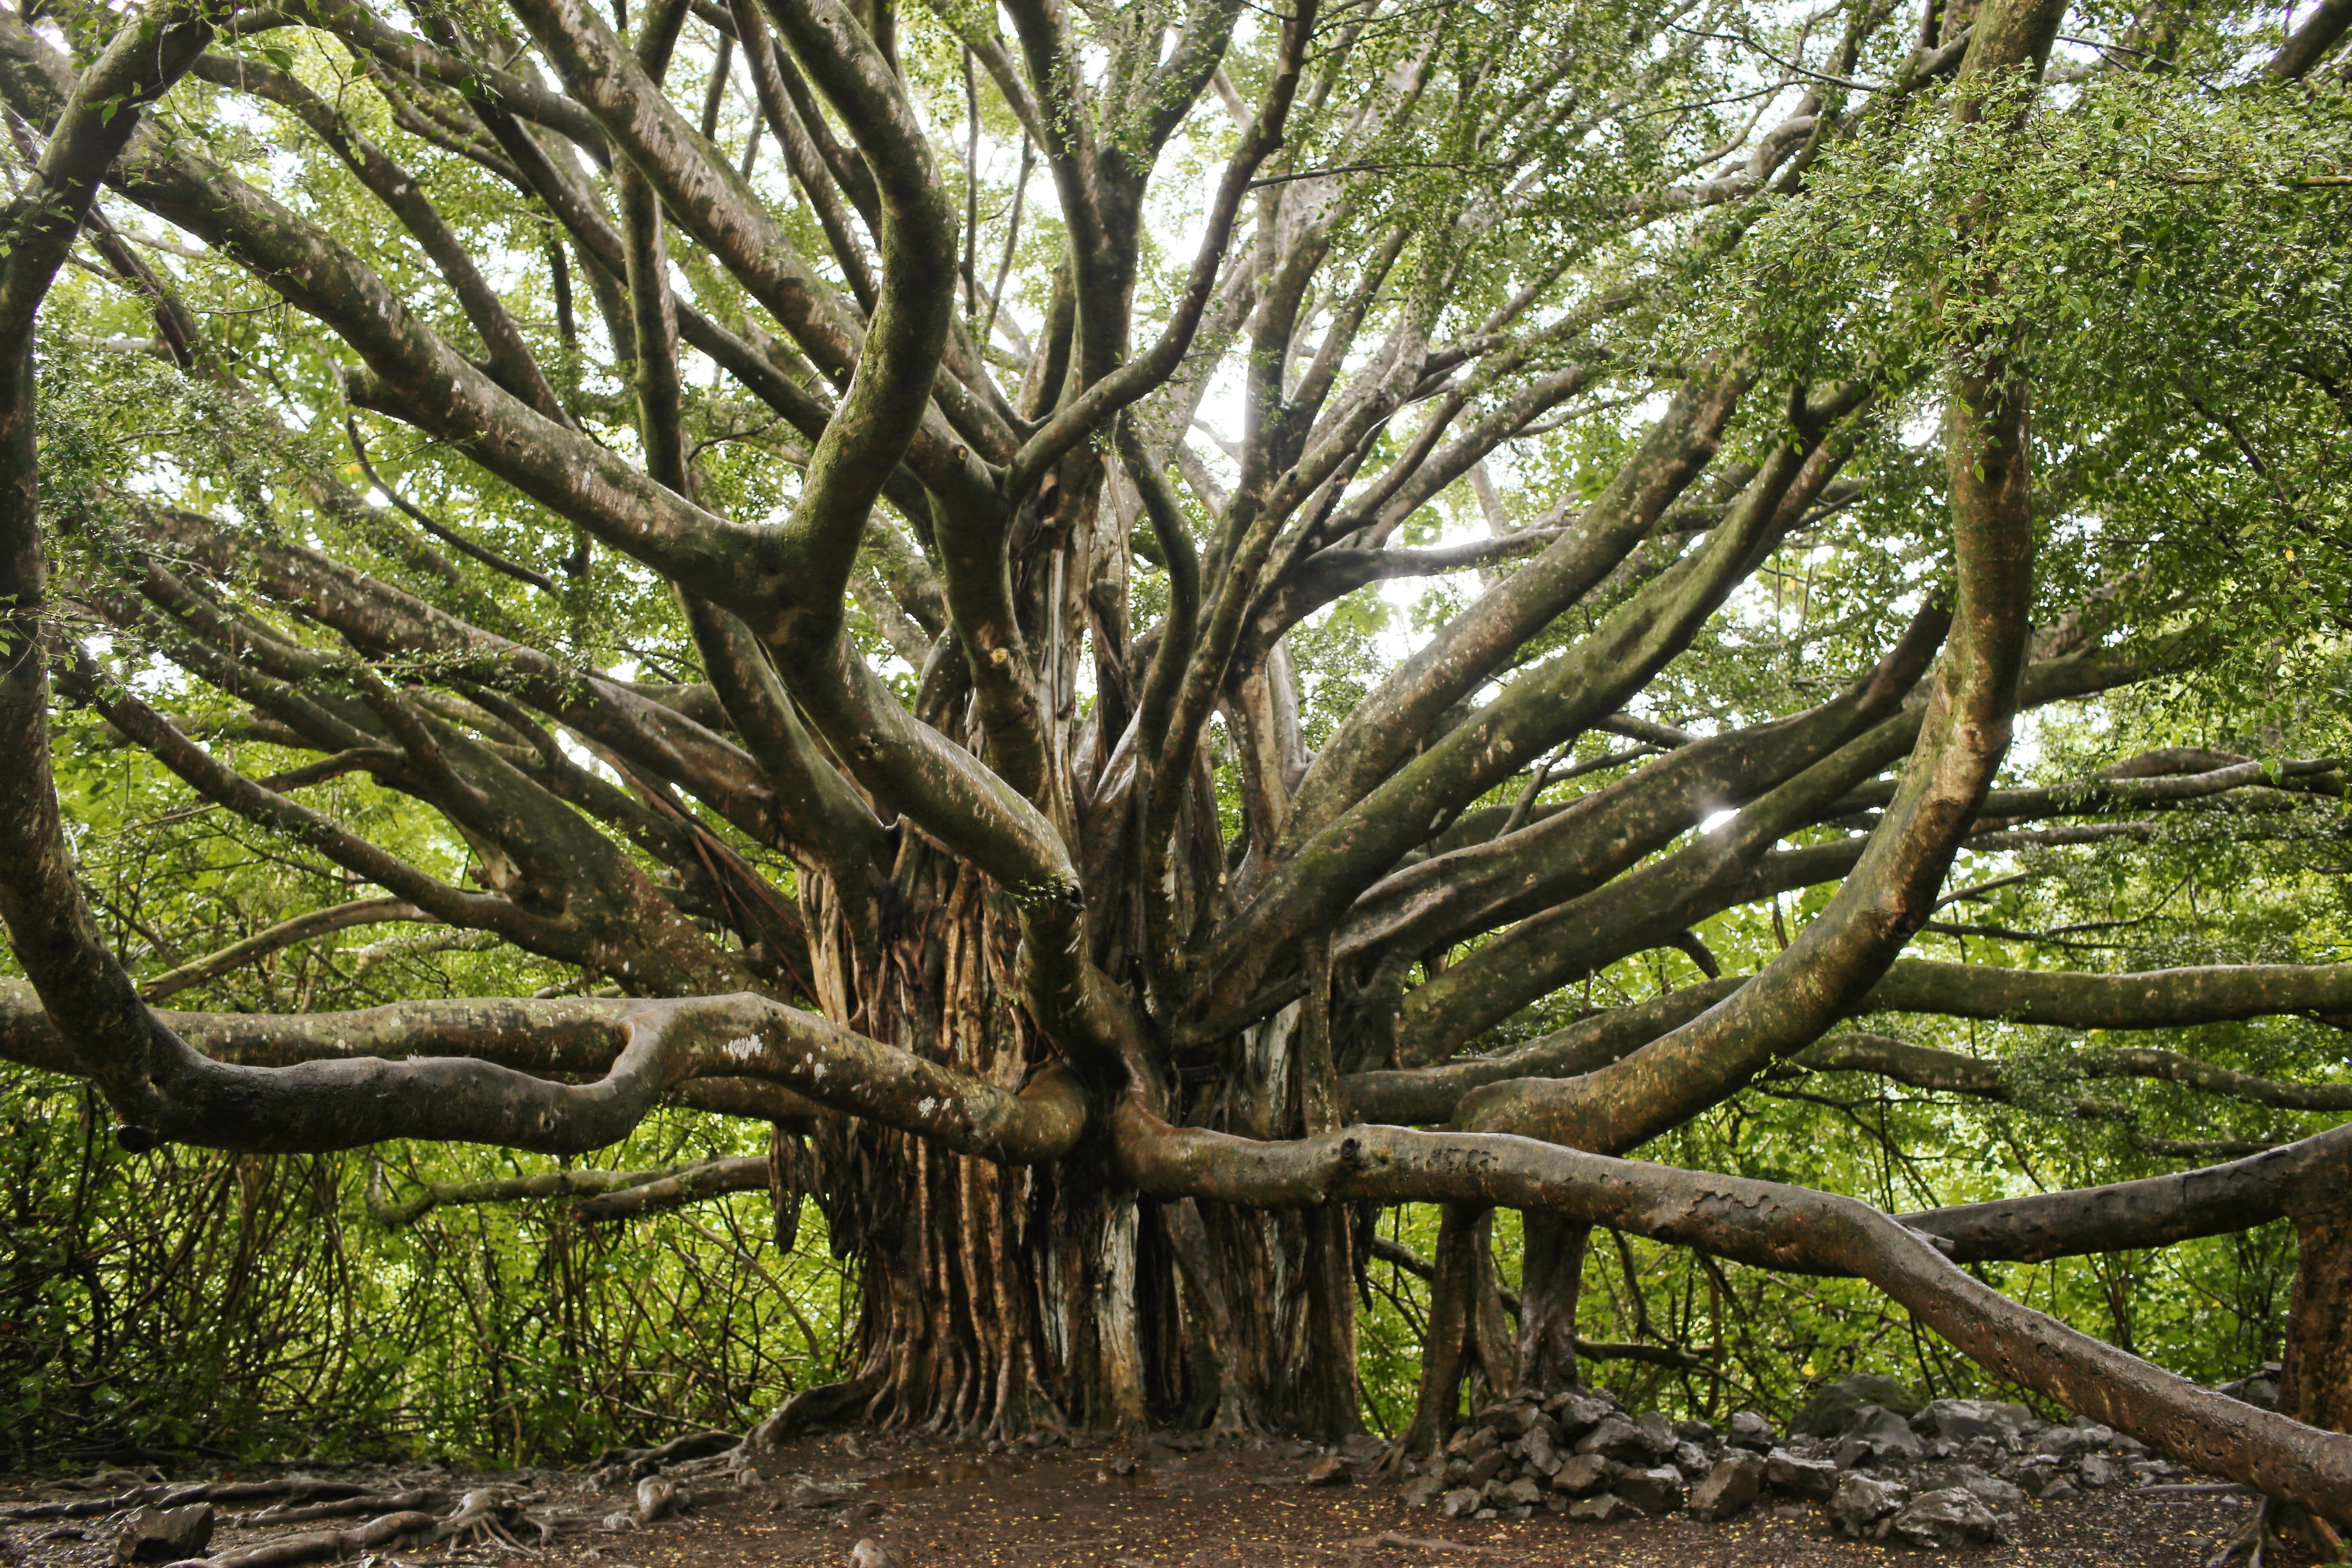 A banyan tree with many trunks and sprawling branches.